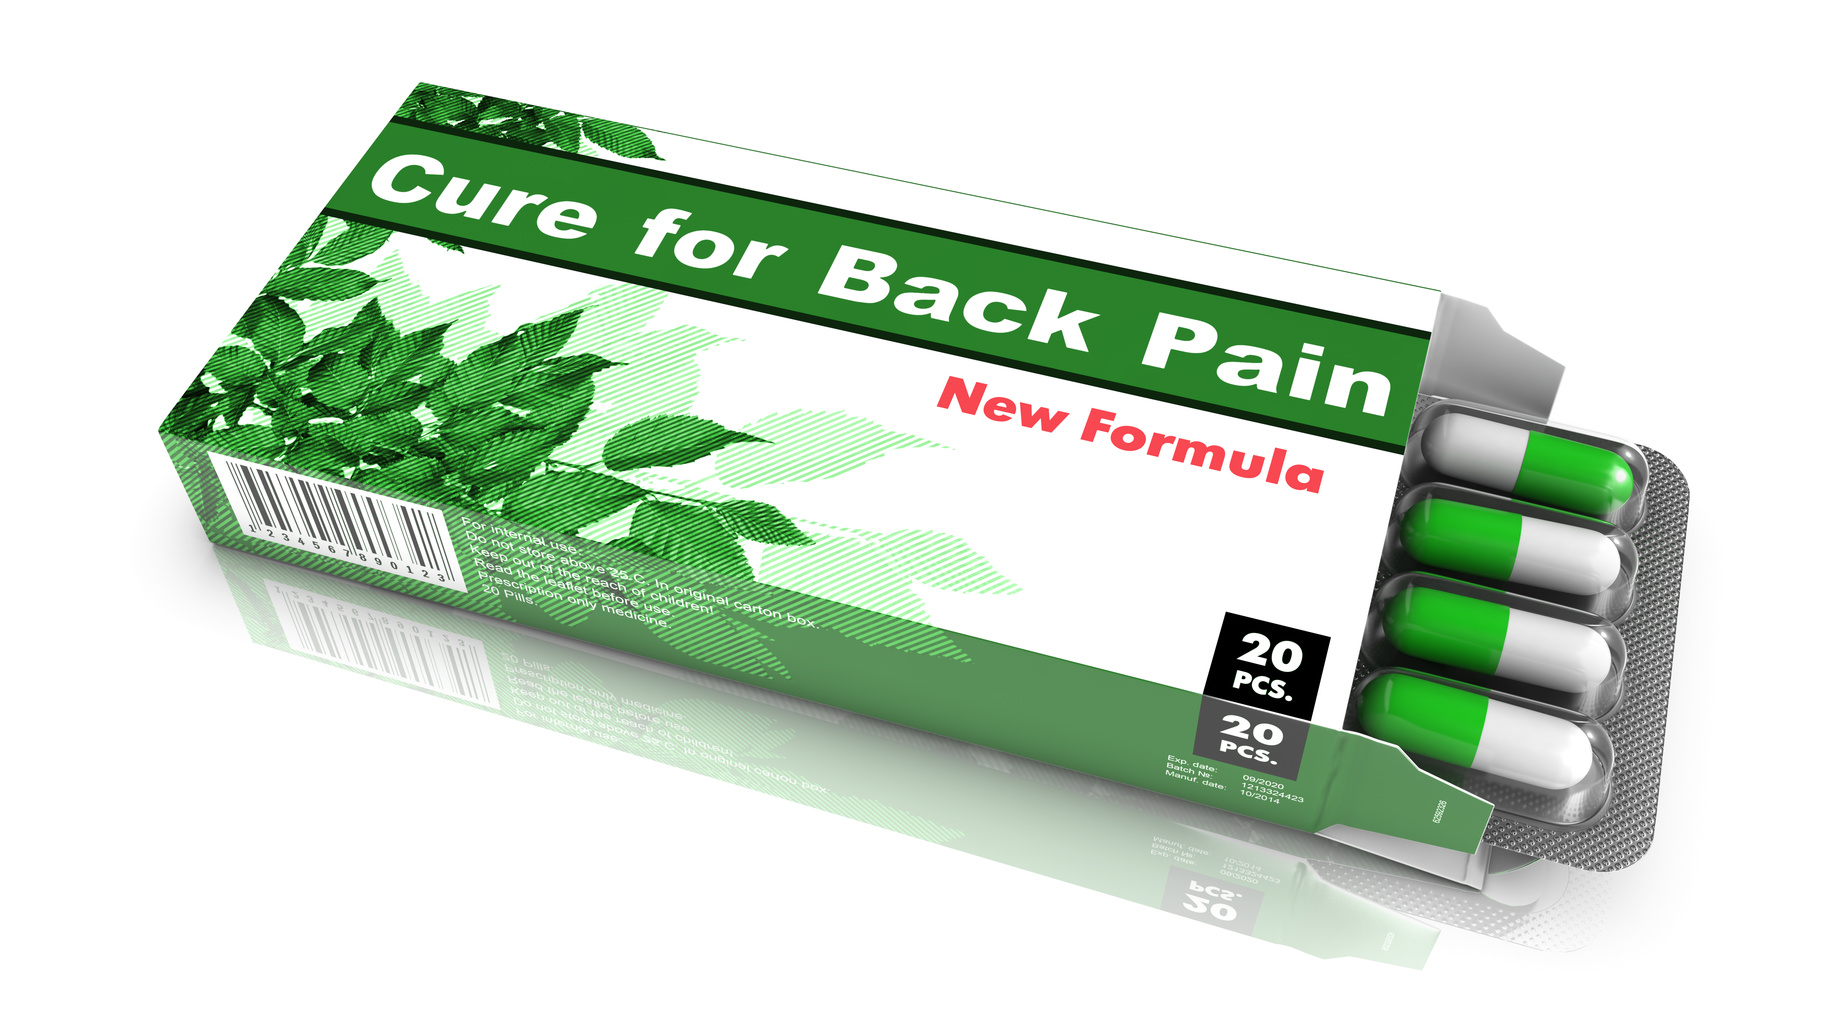 Cure For Back Pain, Green Open Blister Pack.